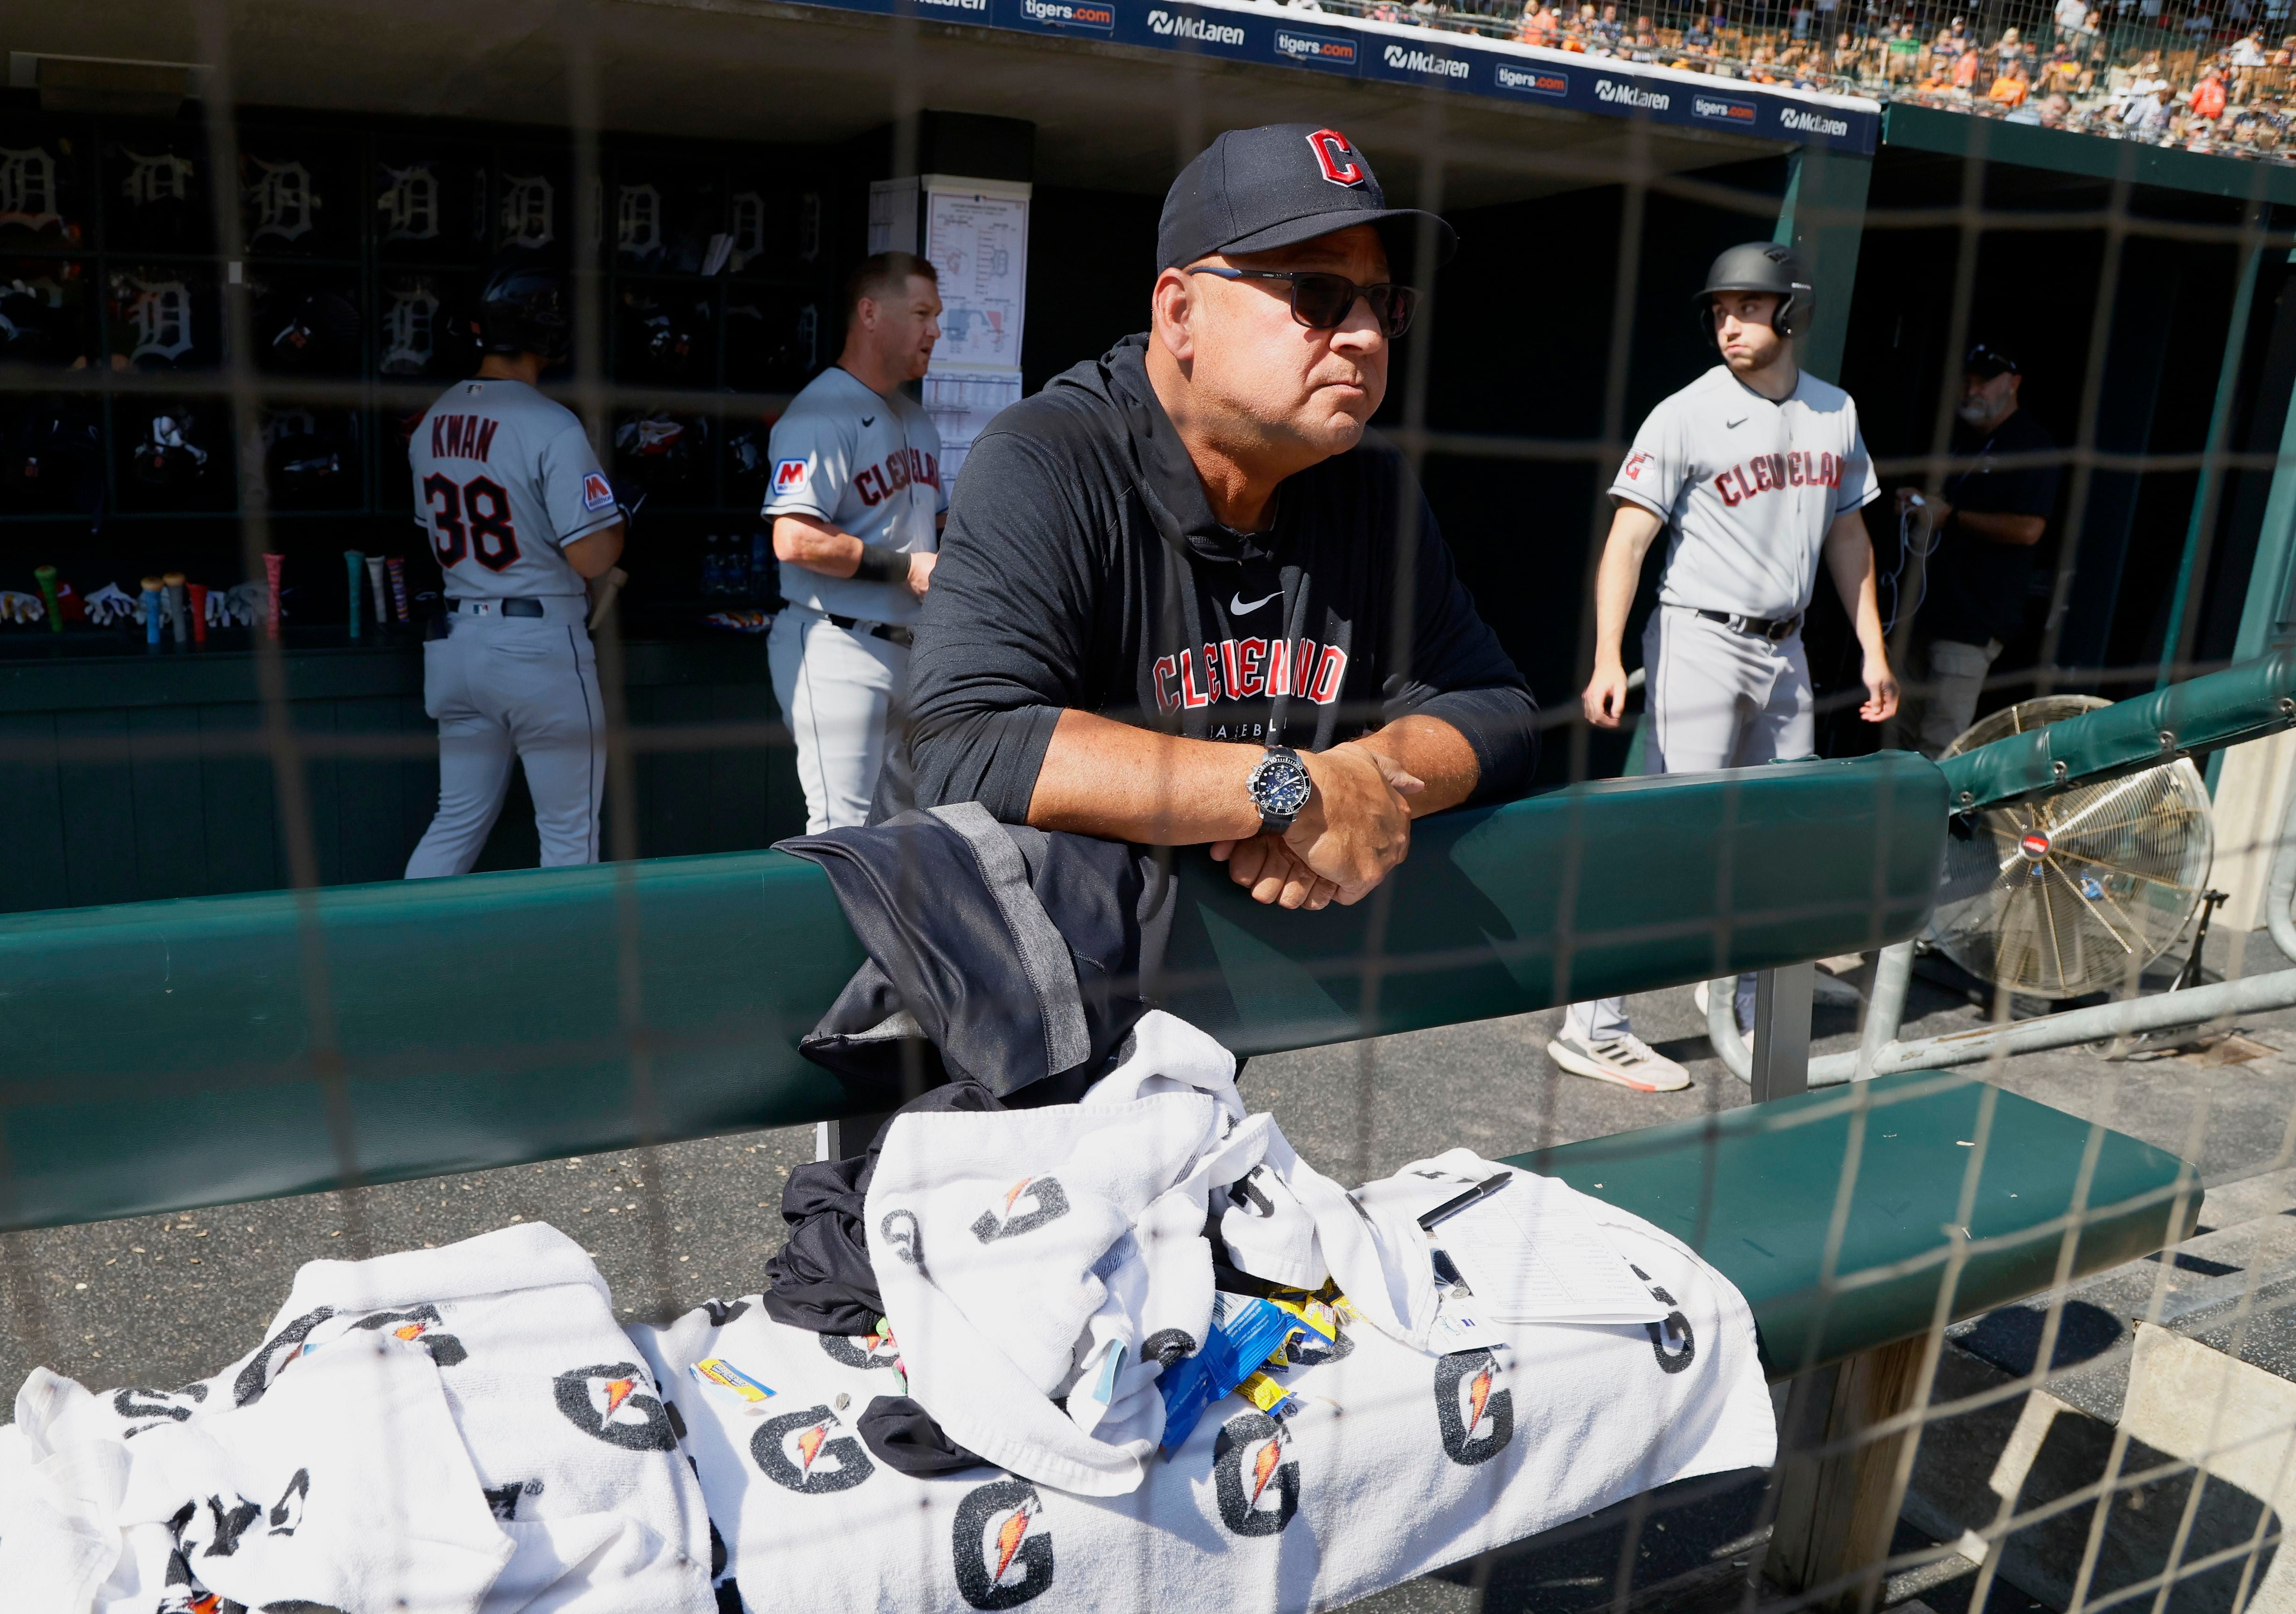 Terry Francona steps away as Cleveland's winningest manager